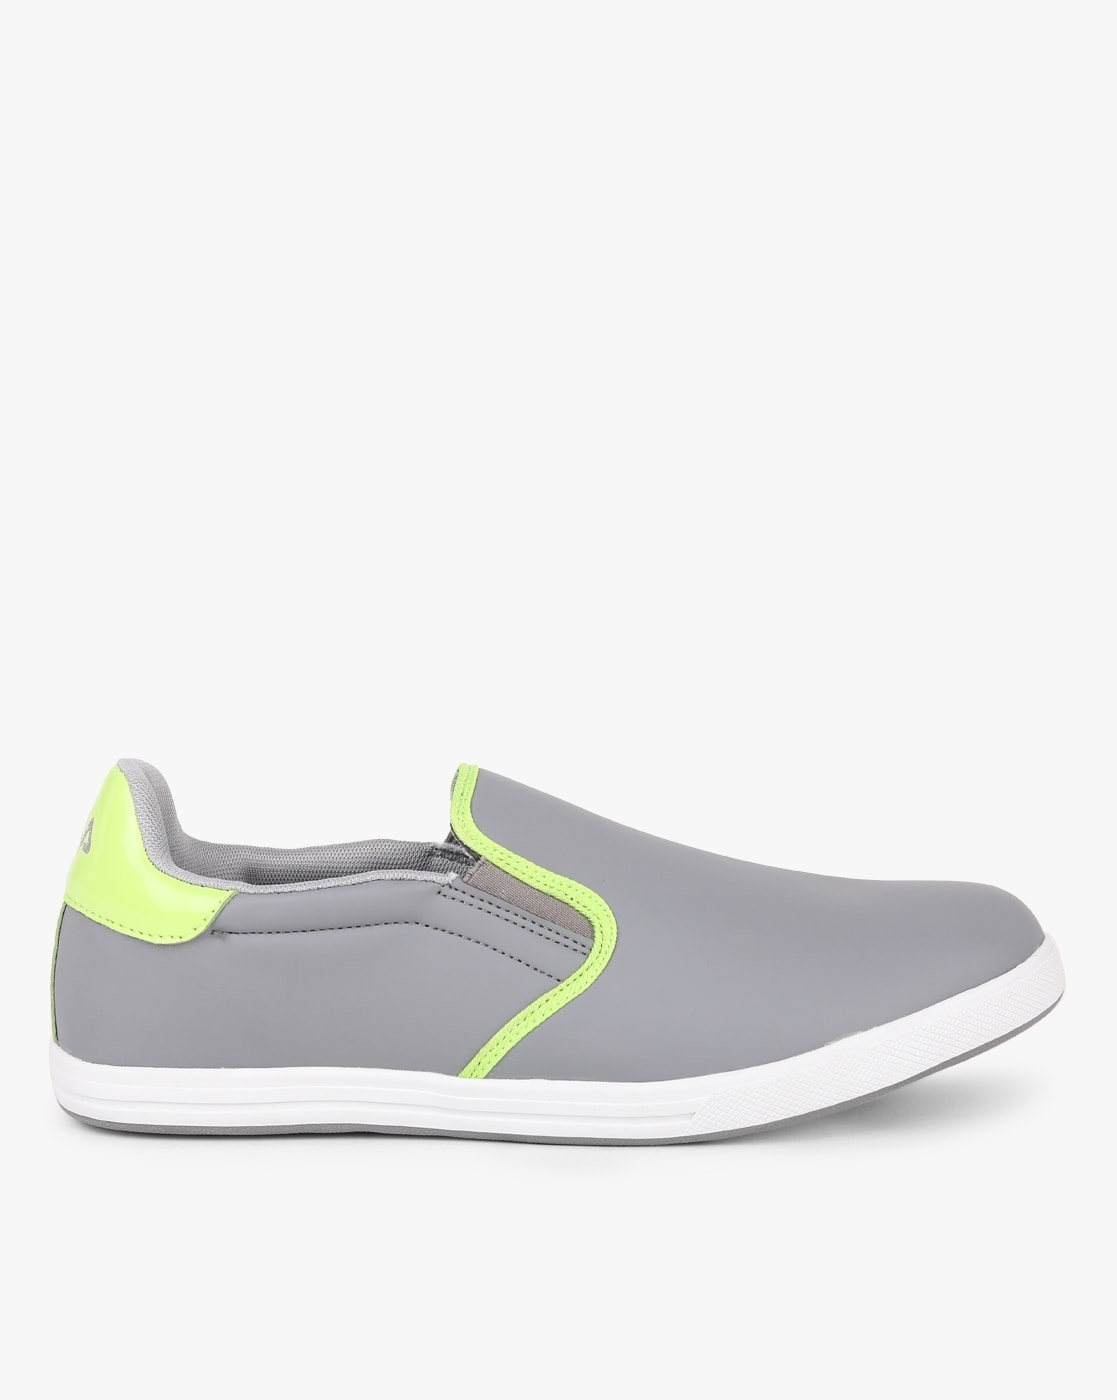 Buy Grey Sports Shoes for Men by FILA 